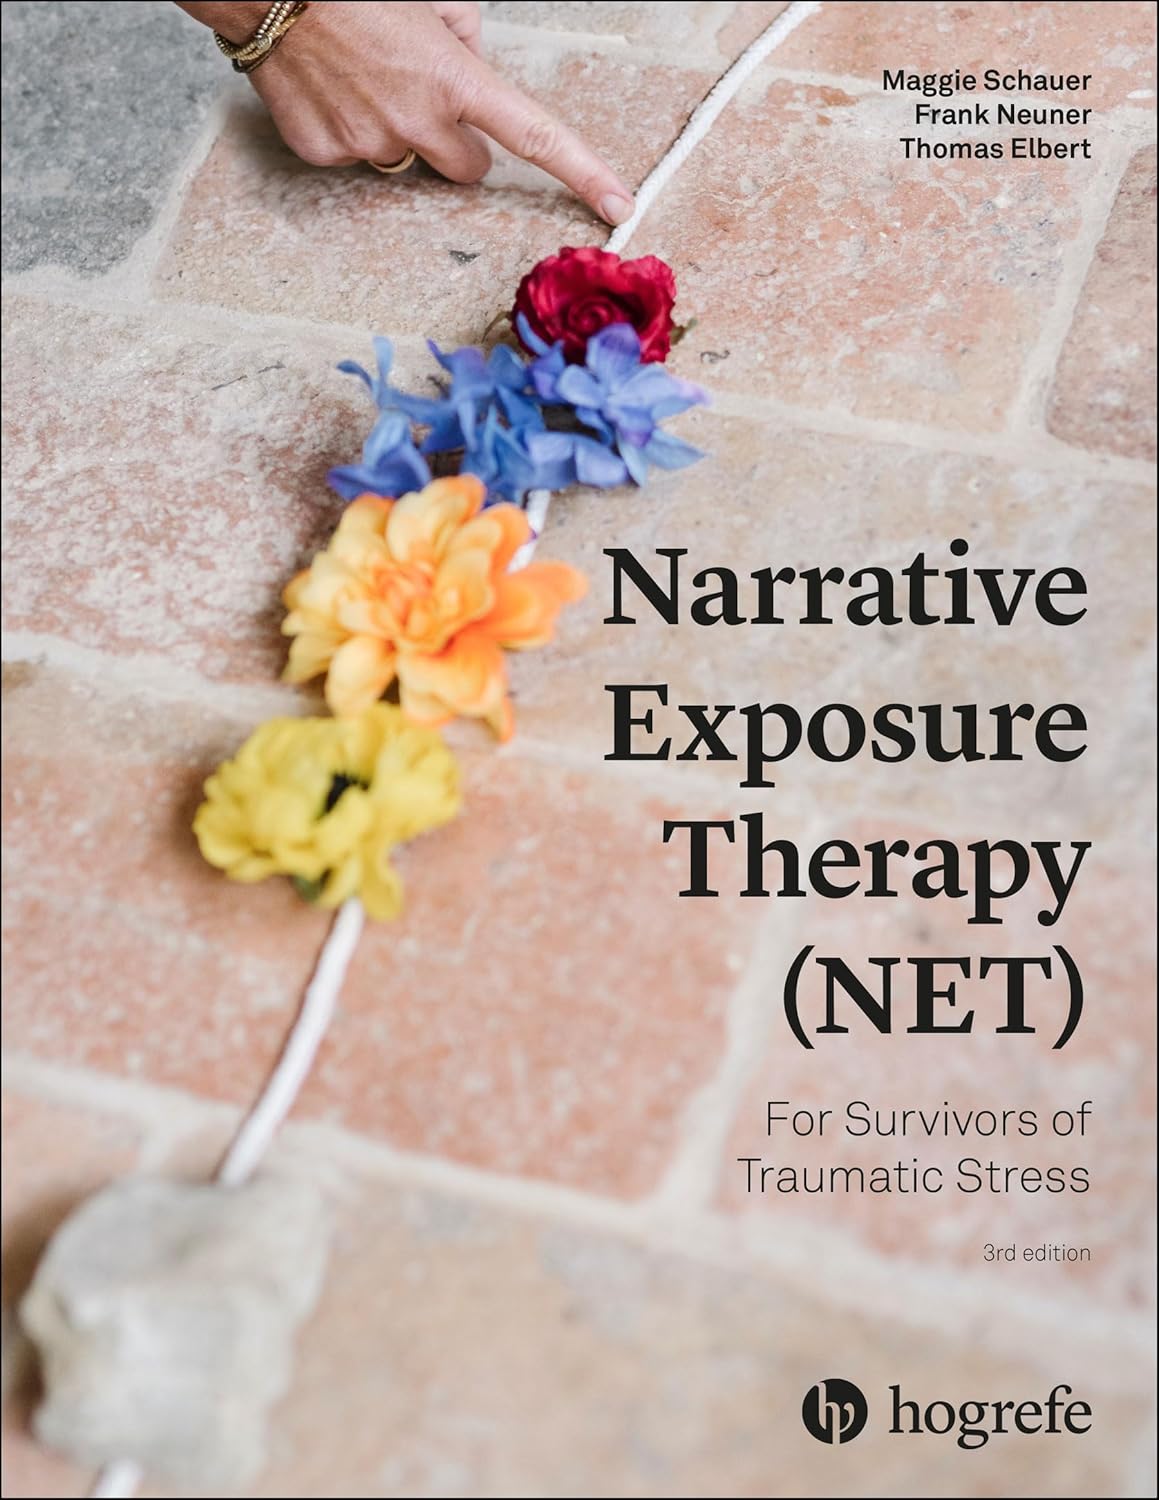 Narrative Exposure Therapy (NET): For Survivors of Traumatic Stress